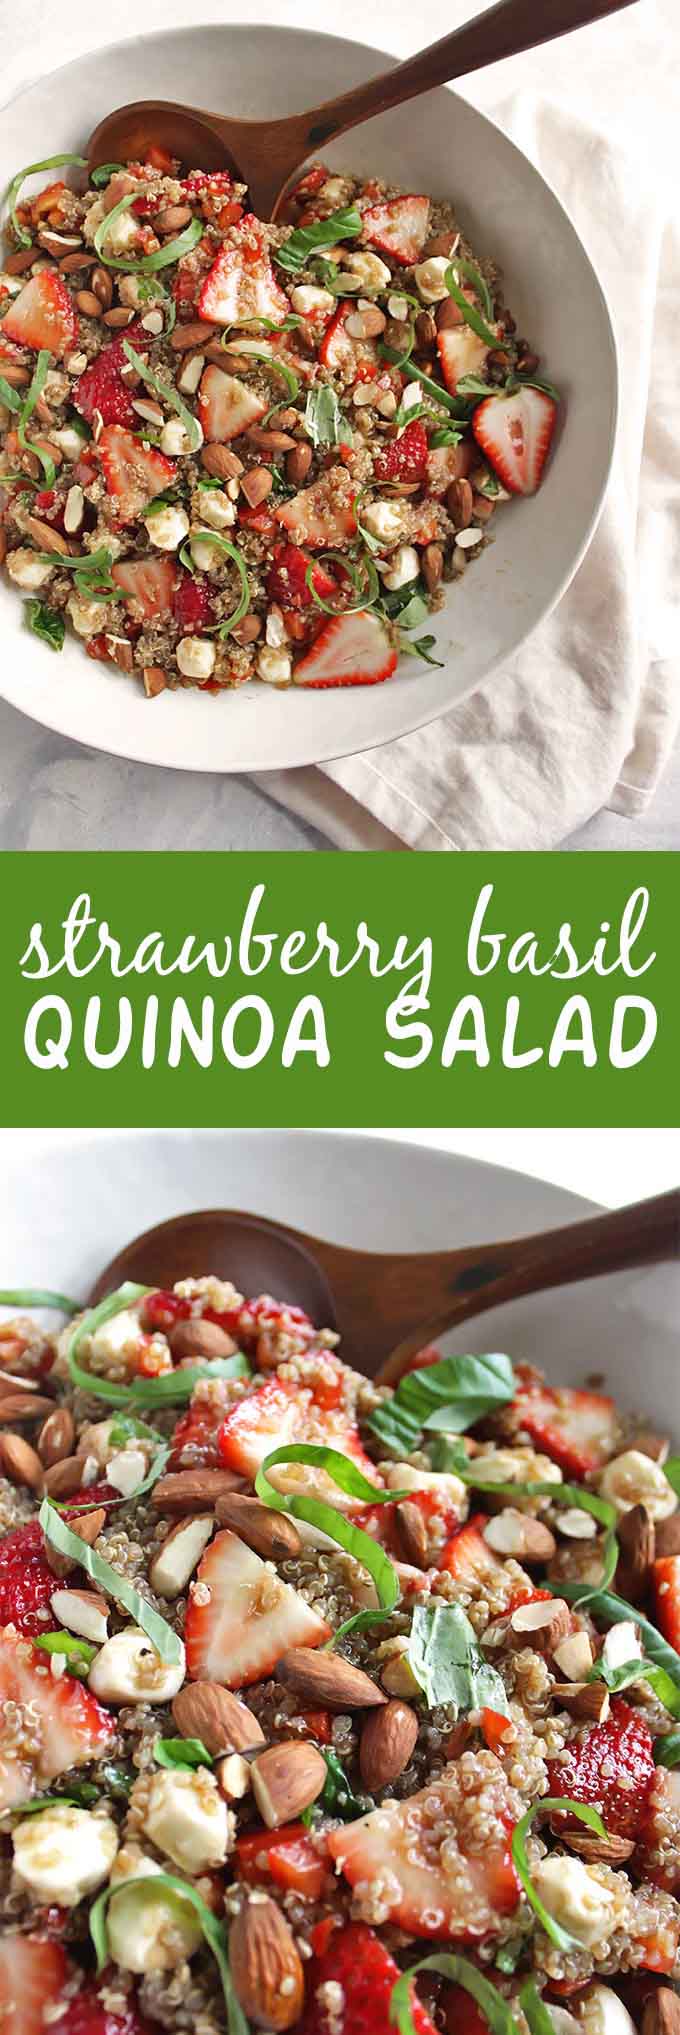 Strawberry Basil Quinoa Salad - great for summertime parties. It's a little sweet, a little savory and all of the summer-y goodness in one bowl - strawberries, fresh basil, mozzarella balls, toasted almonds! This recipe is easy to make, only 30 minutes! Gluten Free/Vegetarian | robustrecipes.com